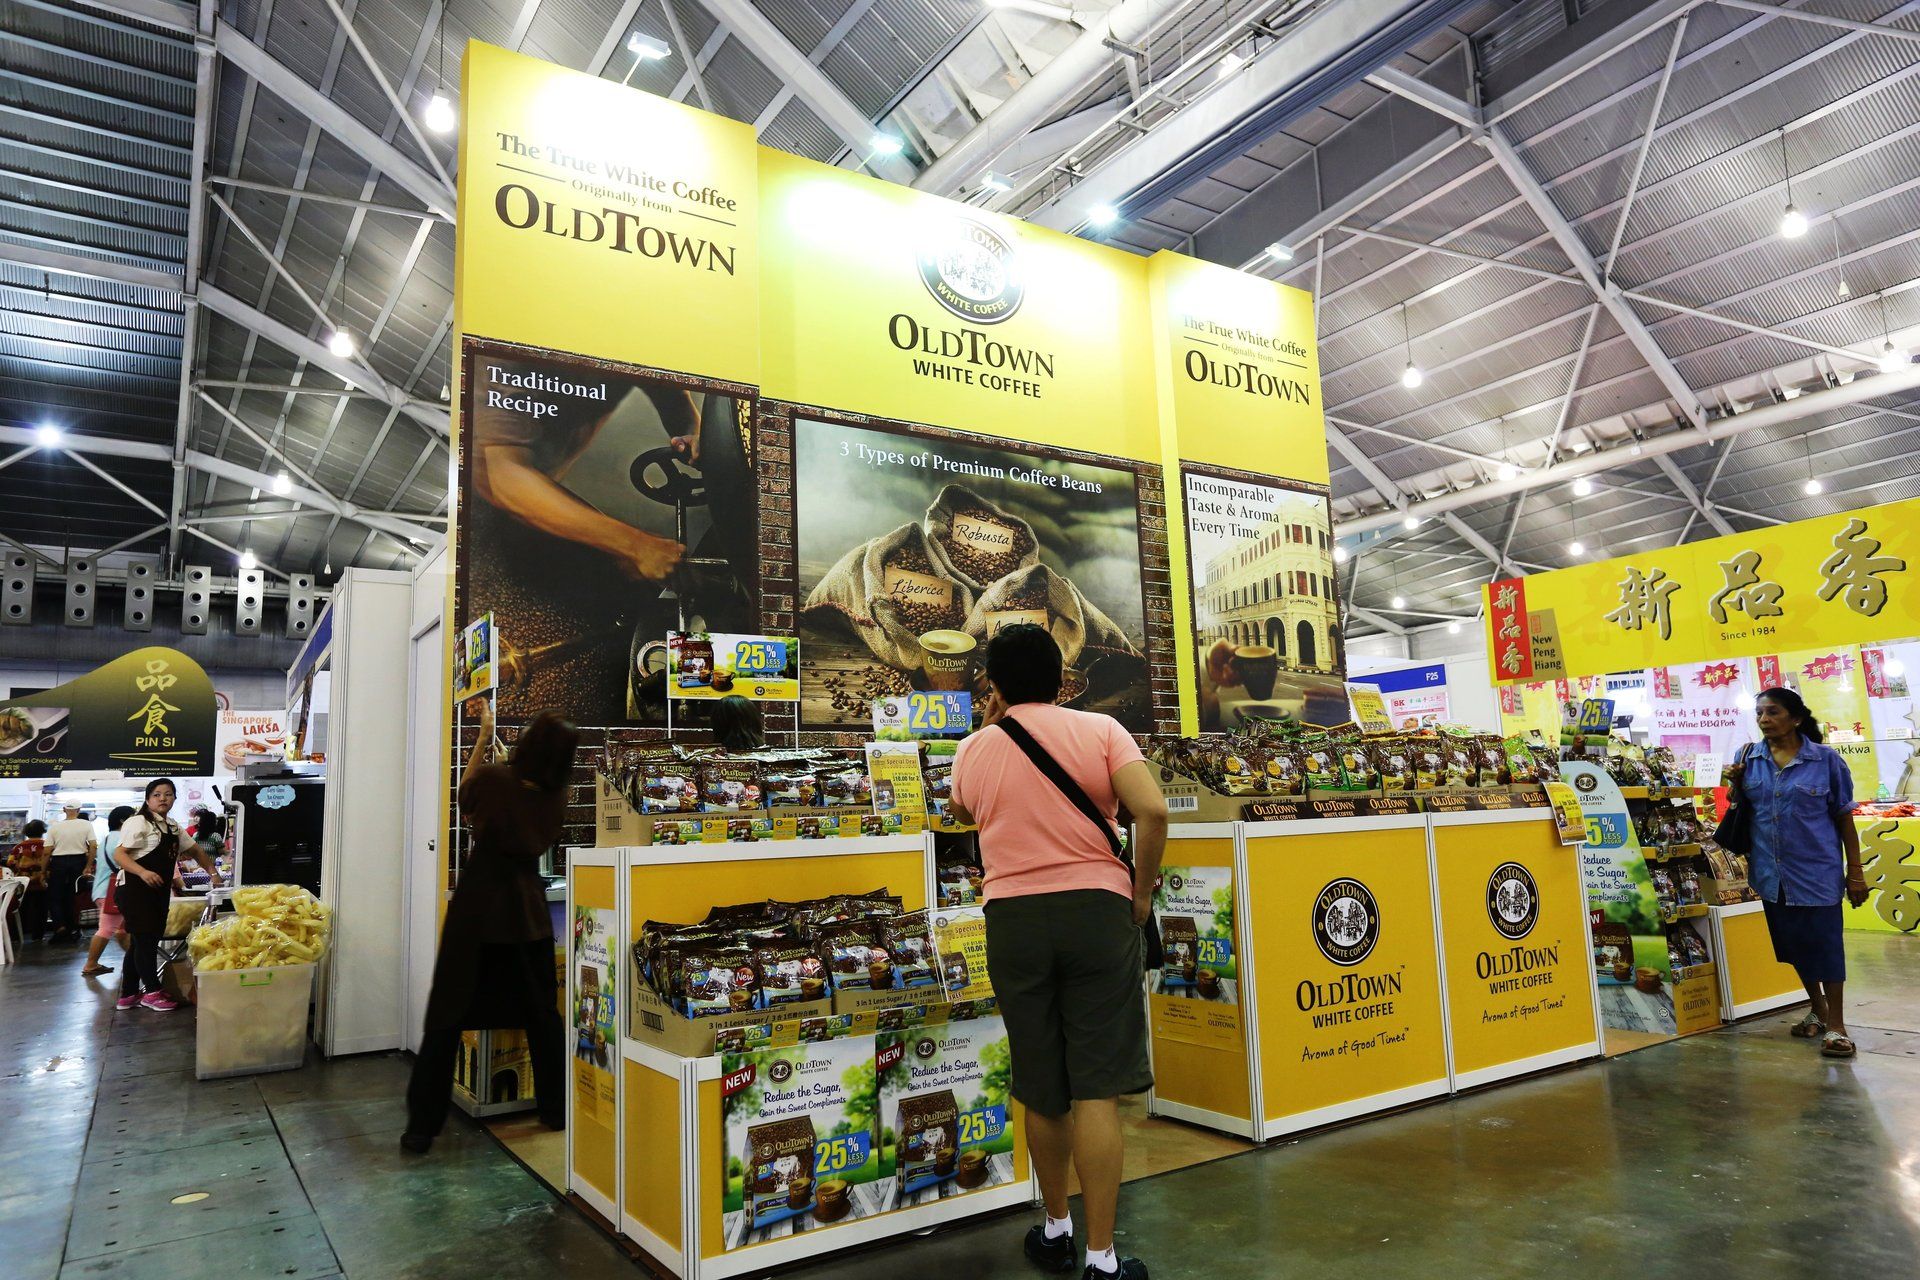 Oldtown Coffee @ Food and Beverage Fair 2014. Booth designed and built by Essential Global Fairs.